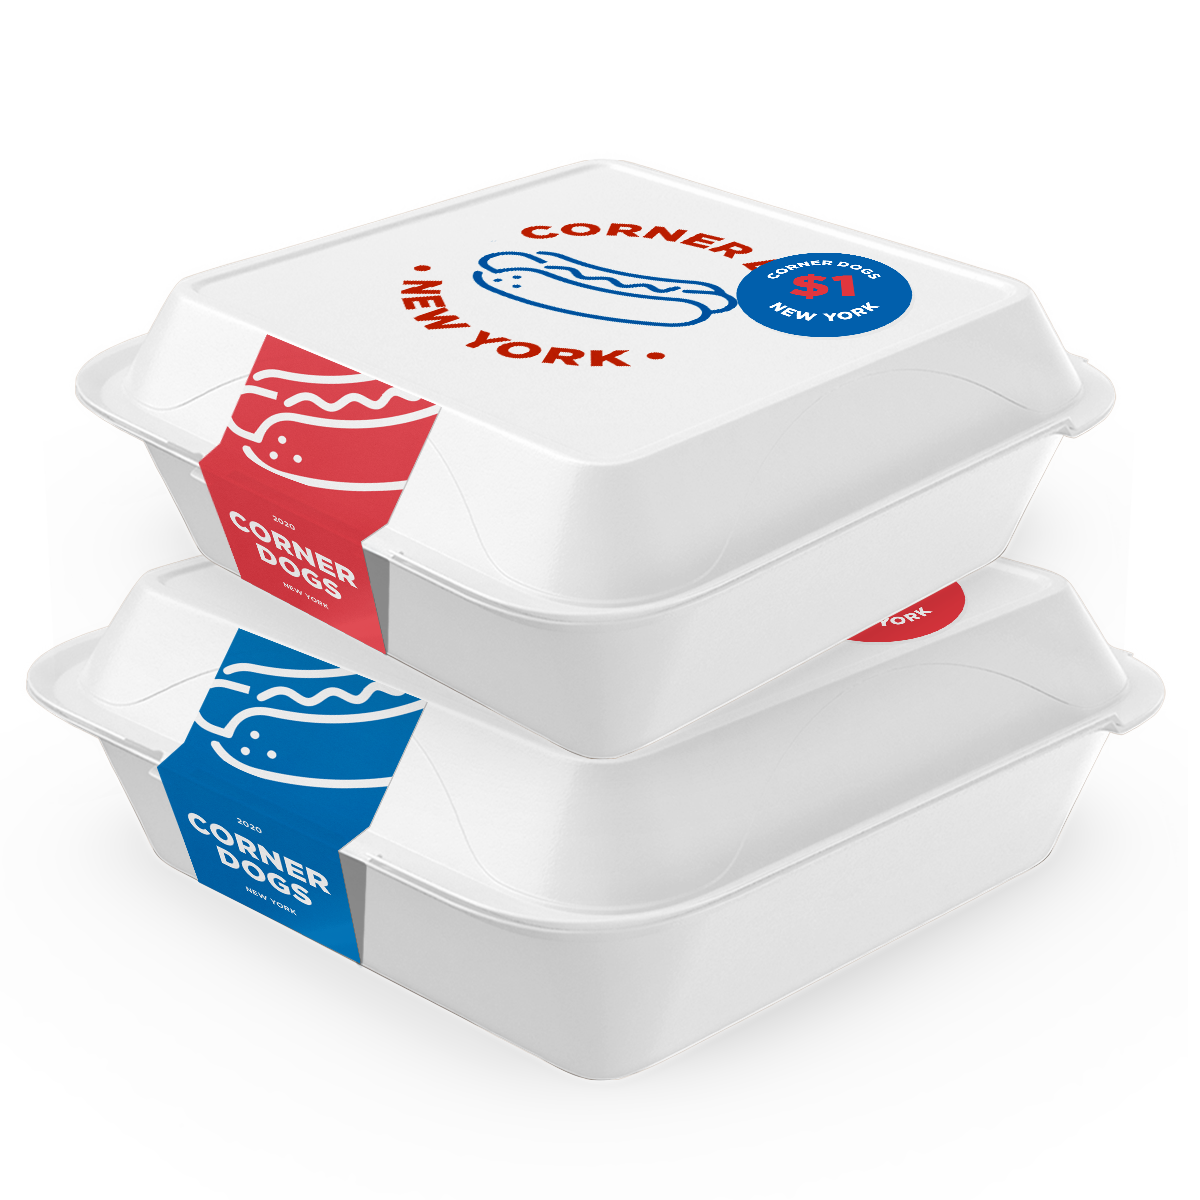 Are To-Go Food Containers Recyclable?